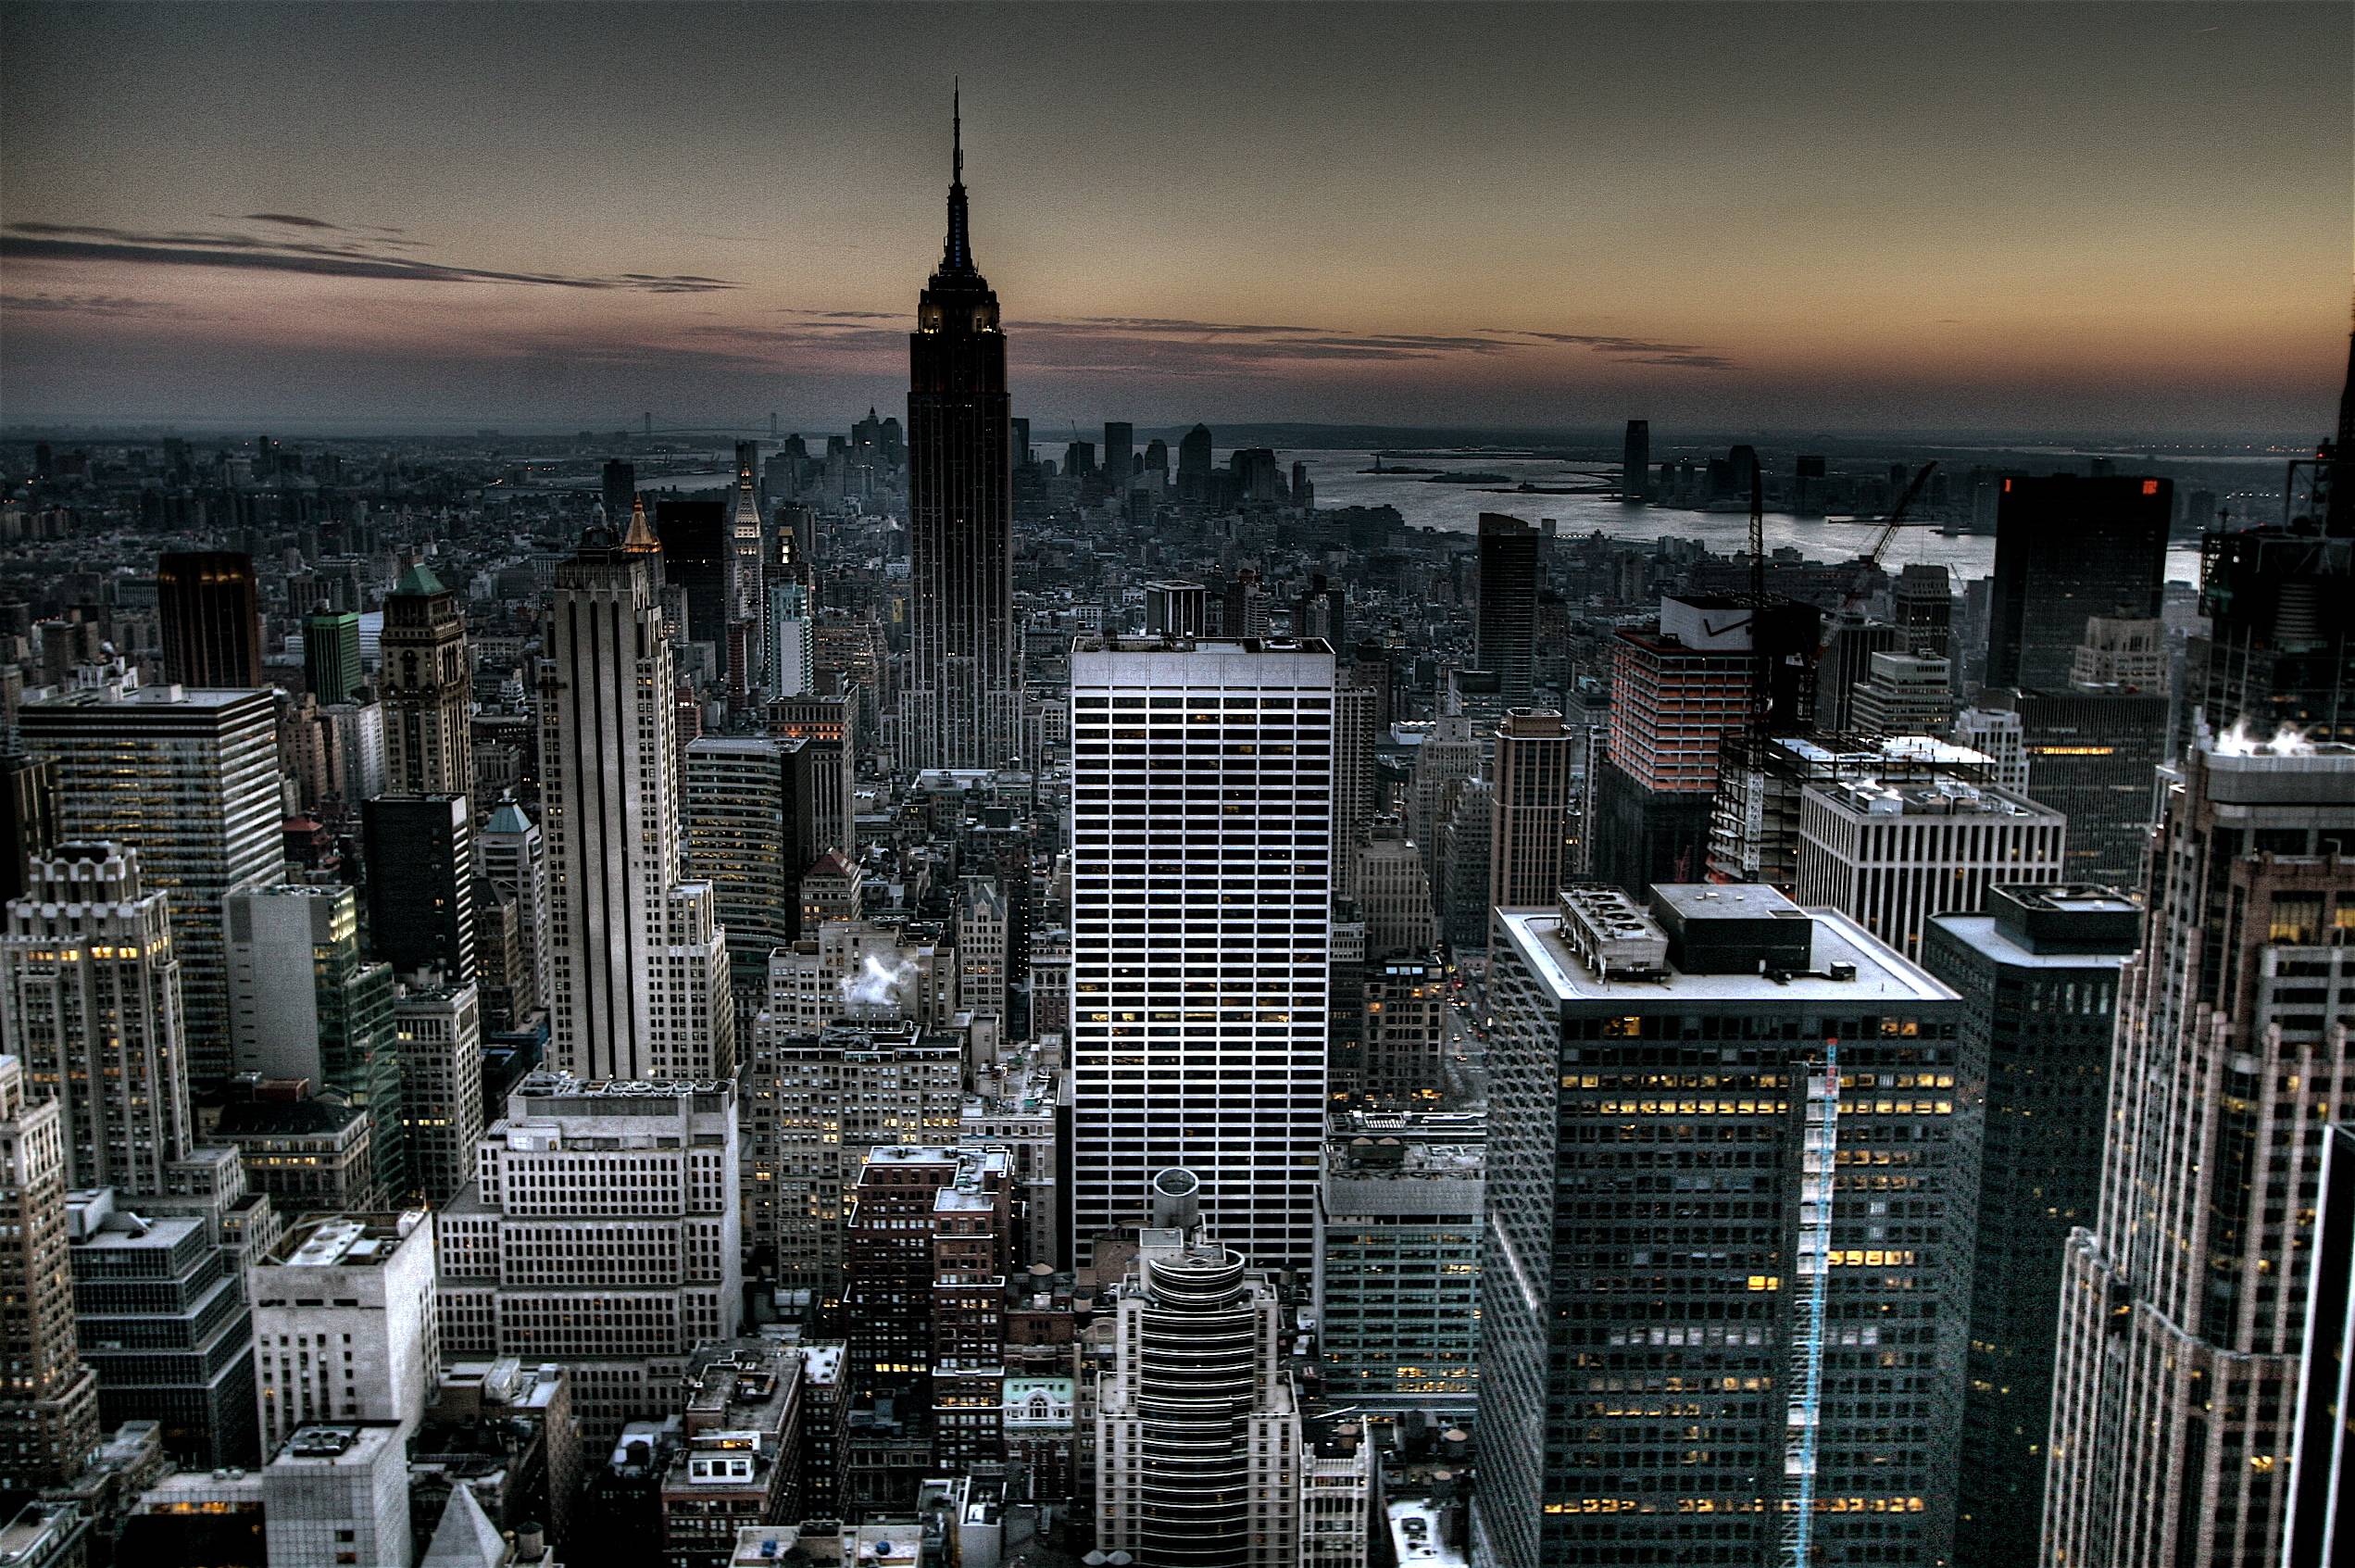 New York City Wallpapers Hd Pictures Wallpaper Cave